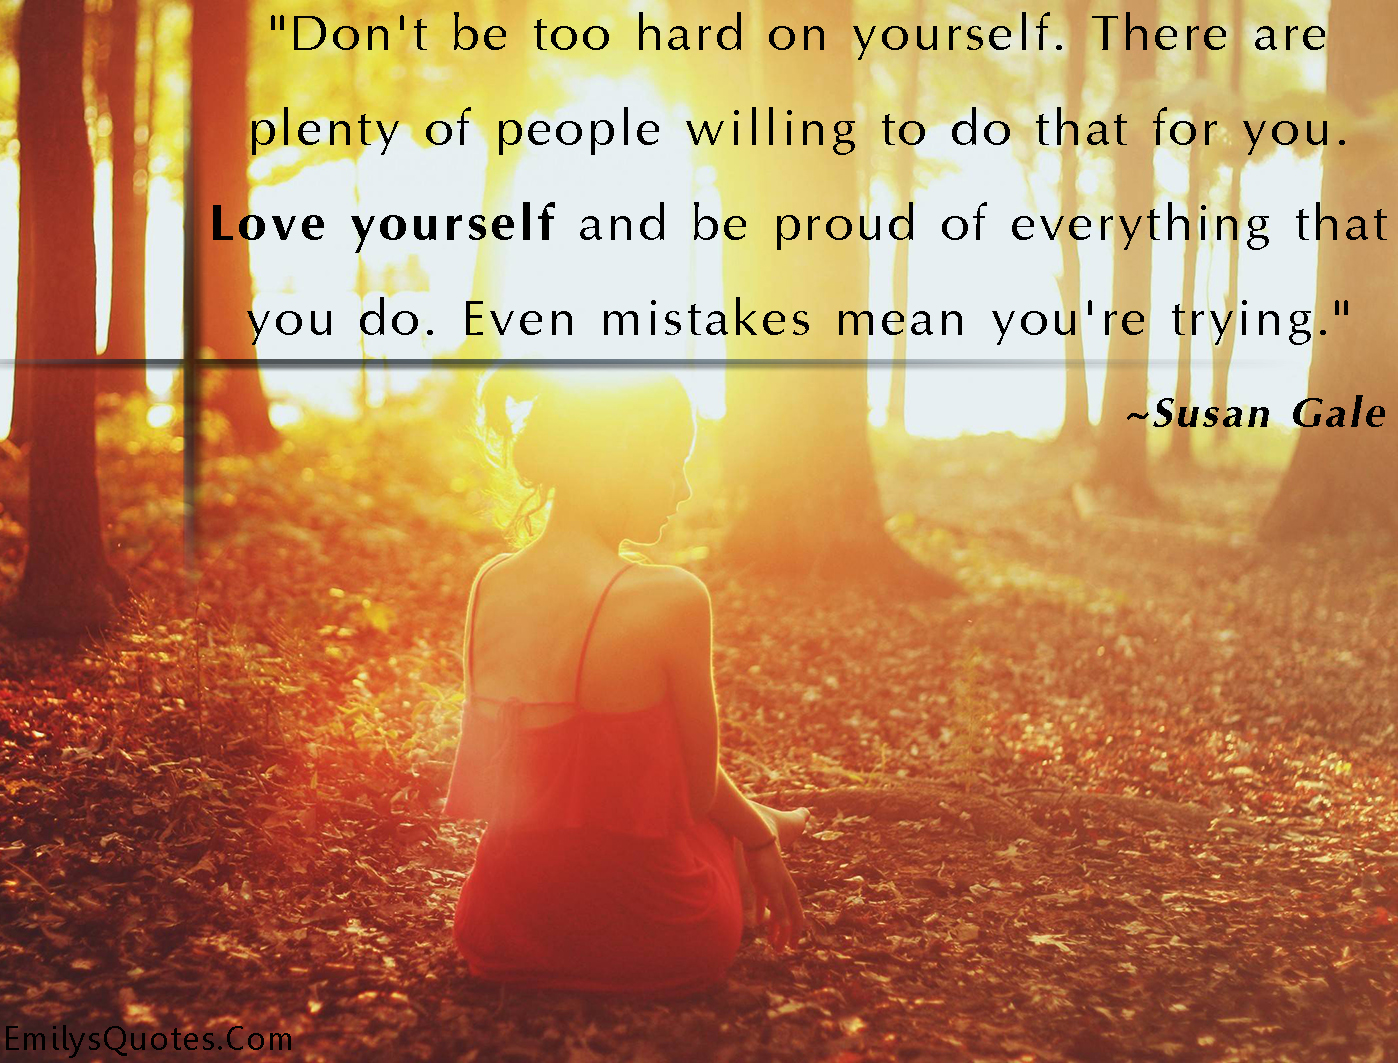 Don’t be too hard on yourself. There are plenty of people willing to do that for you. Love yourself and be proud of everything that you do. Even mistakes mean you’re trying